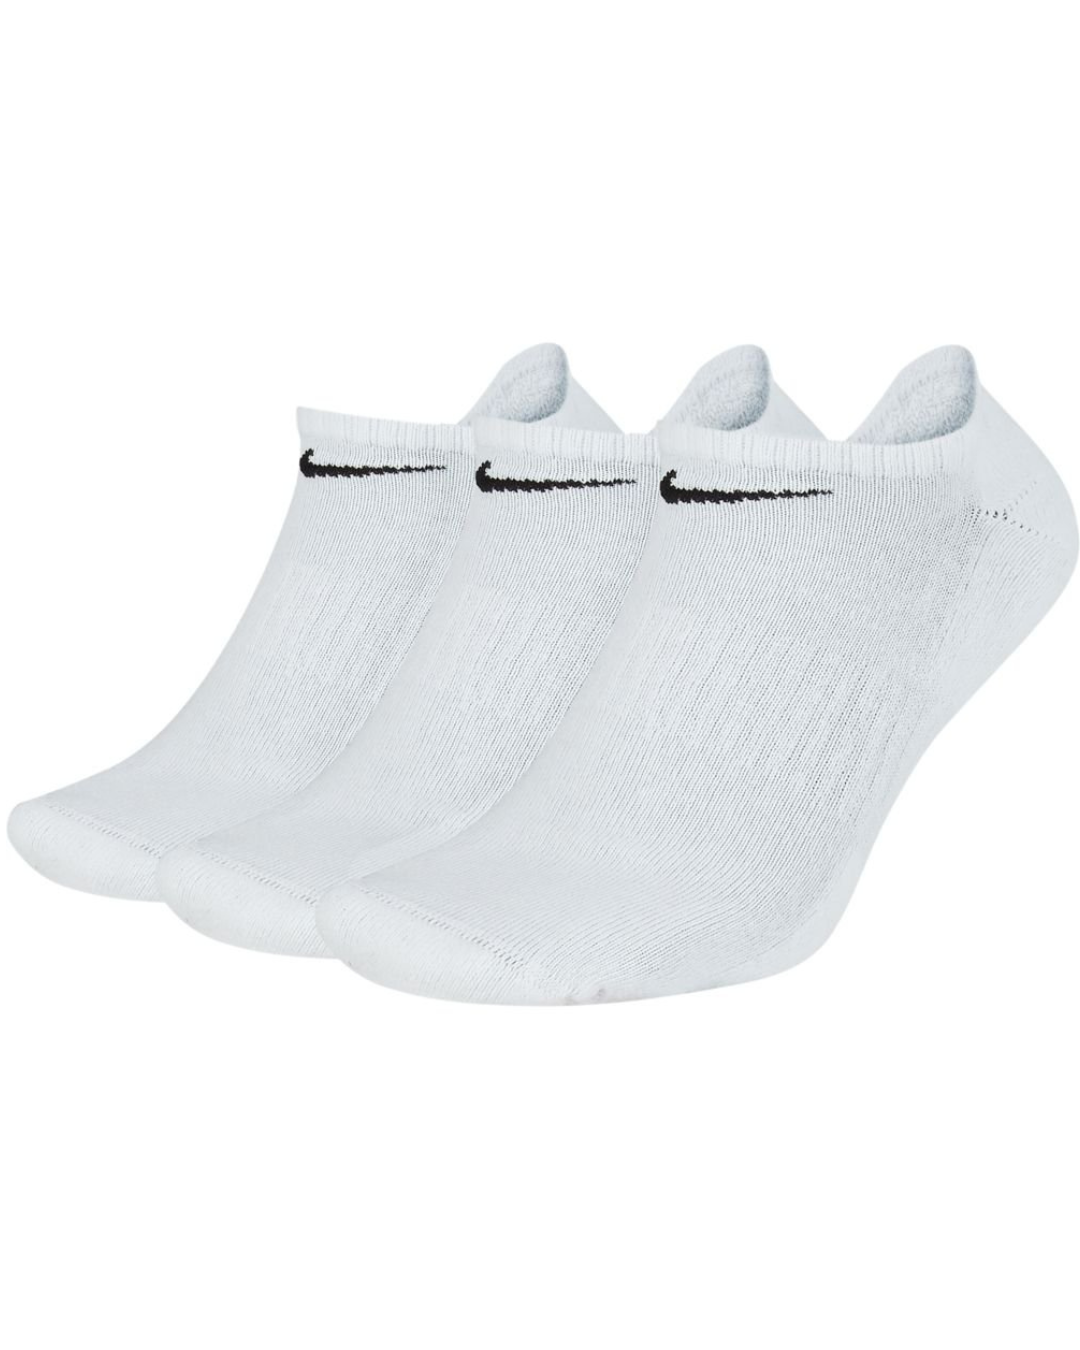 Nike Everyday Cotton Cushioned No Show